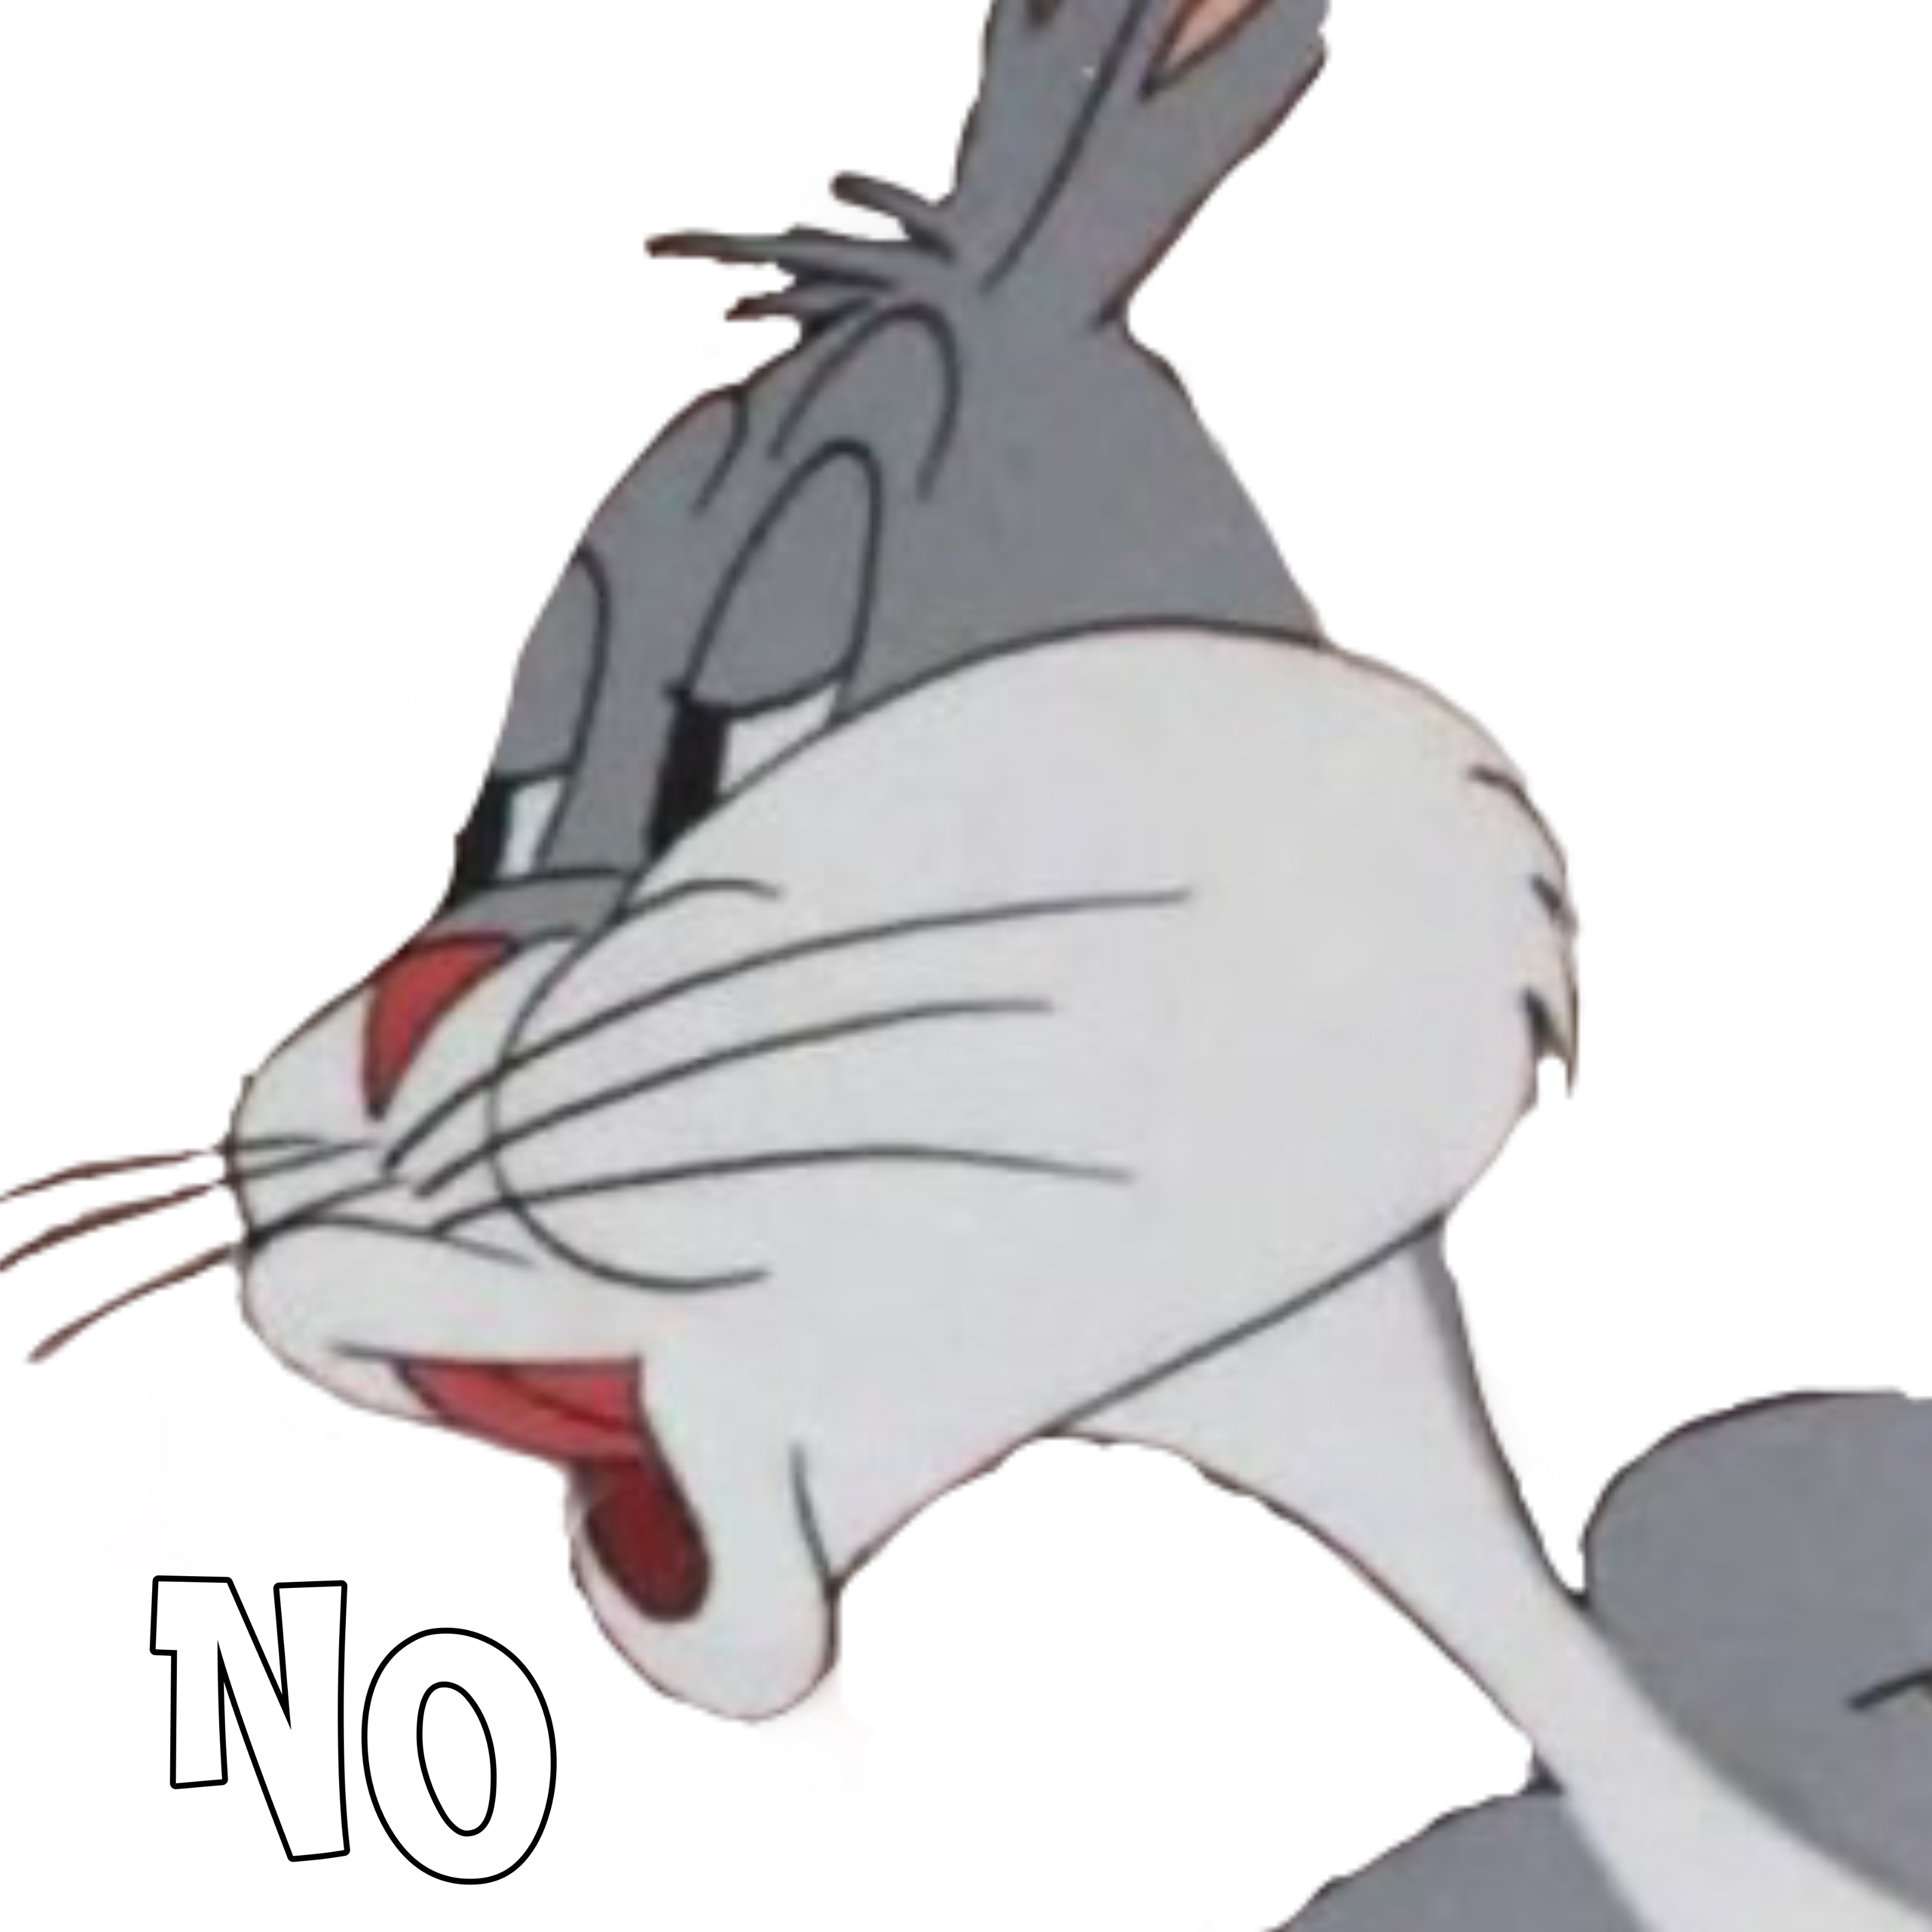 No Bugs Bunny Meme No Bugs Bunny Template Without The Line At